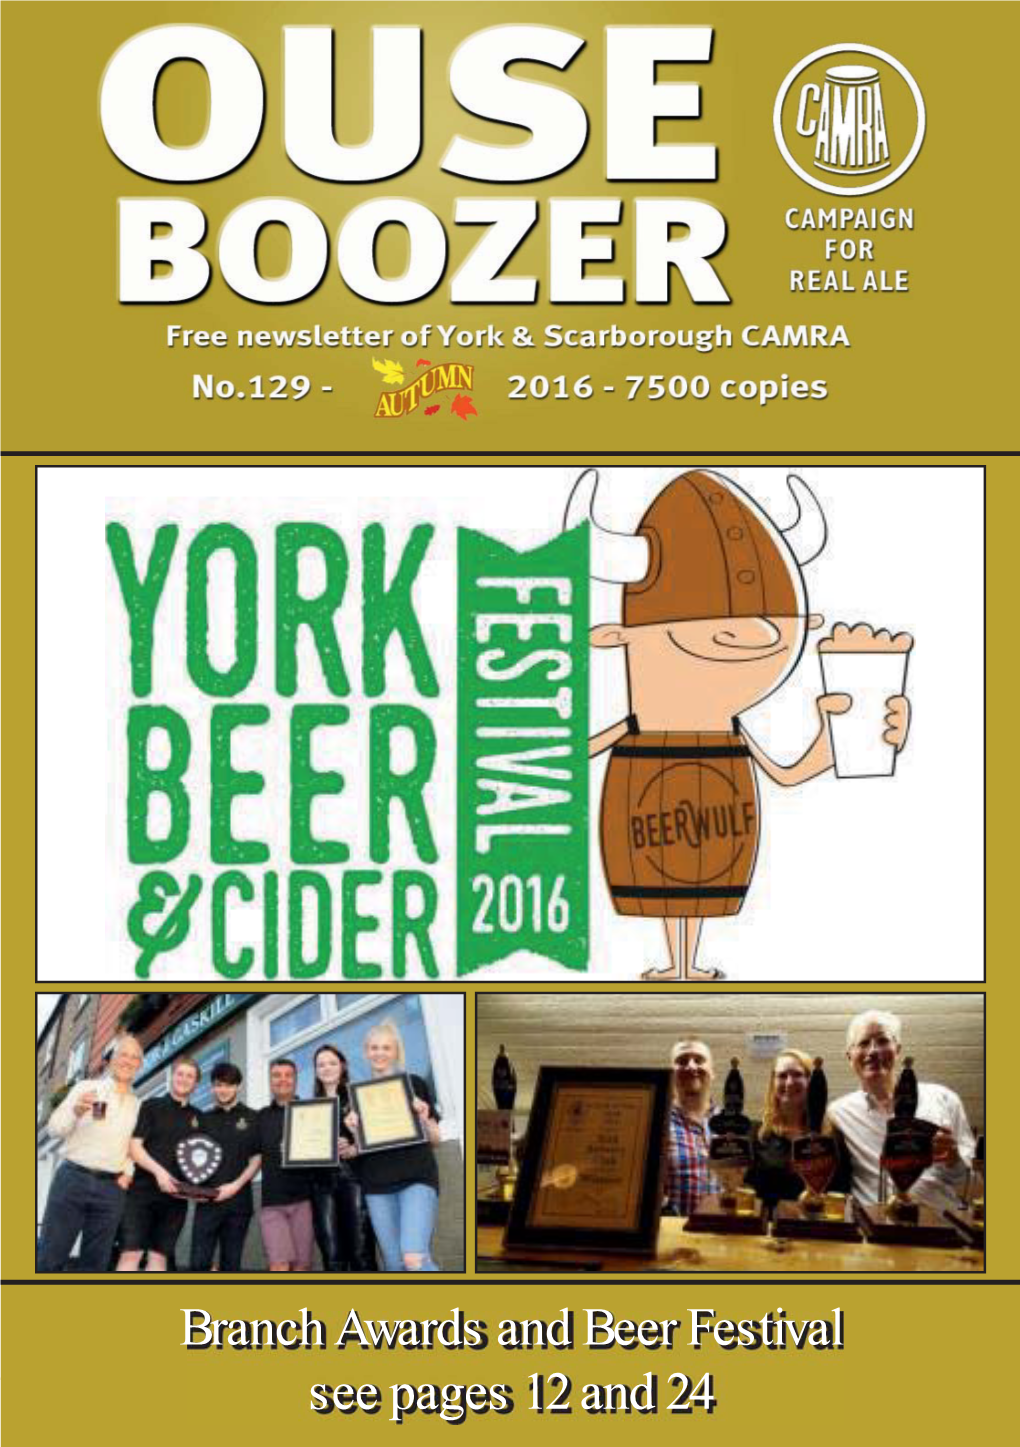 Branch Awards and Beer Festival See Pages 12 and 24